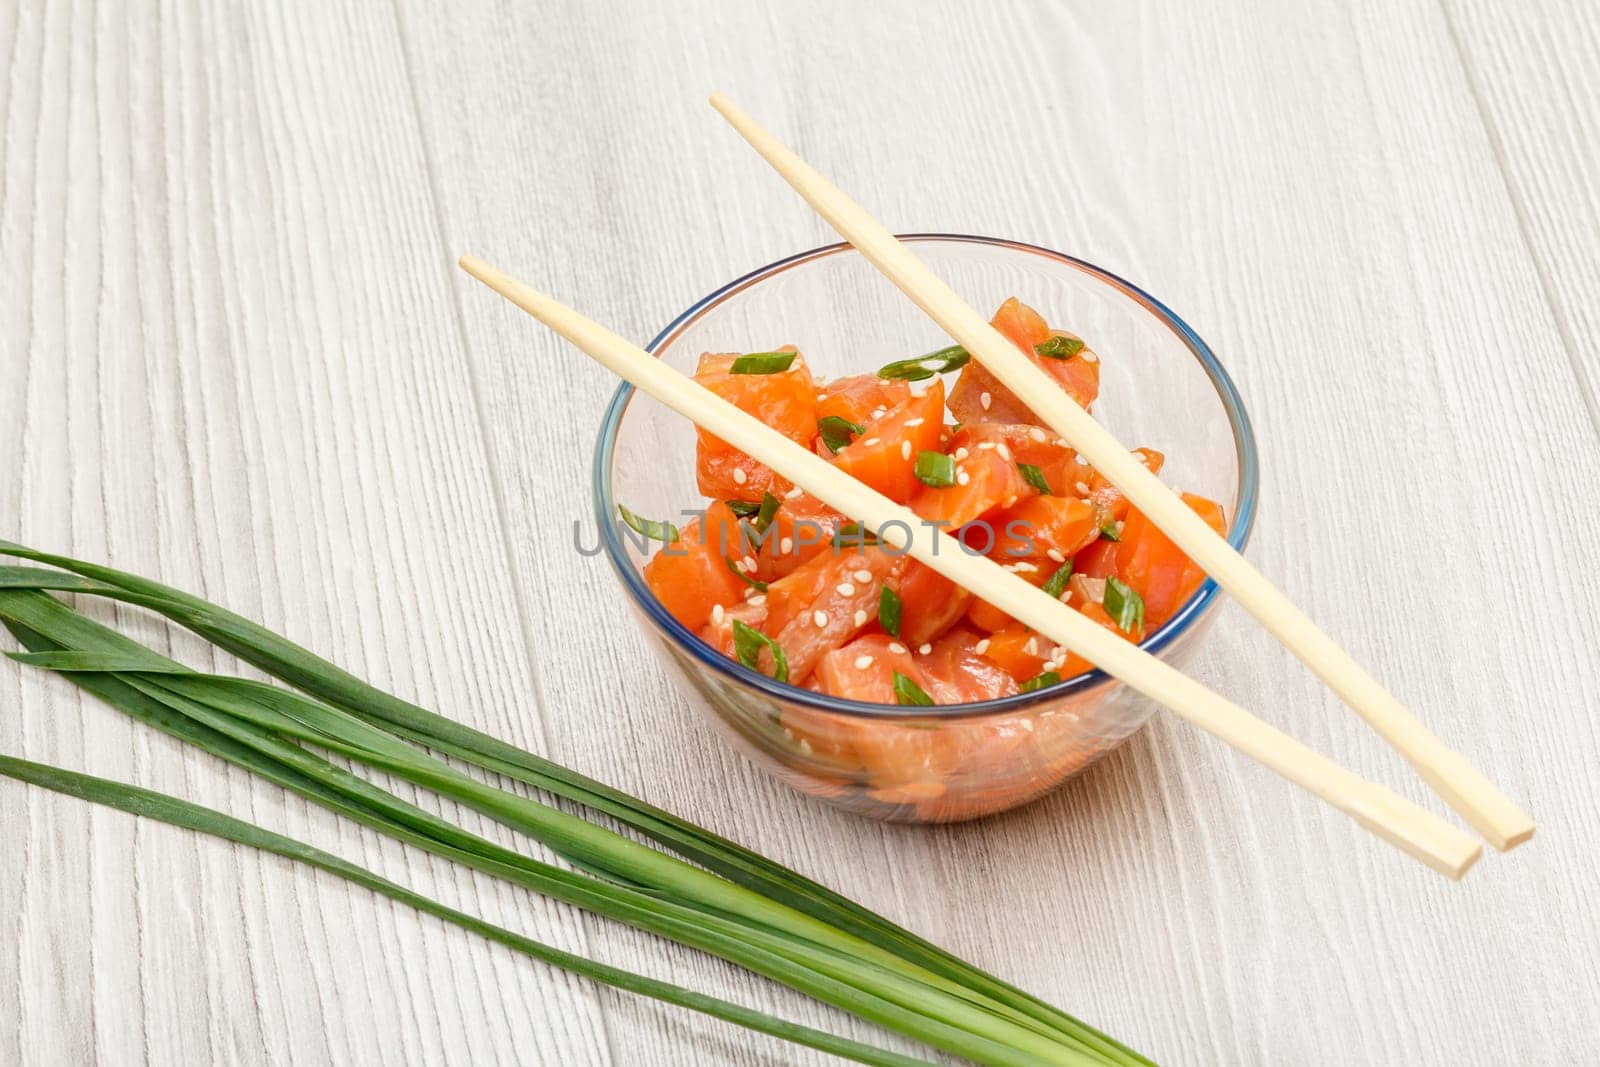 Hawaiian salmon poke with green onions and sesame seeds in glass bowl with chopsticks. Top view with copy space. Organic seafood.